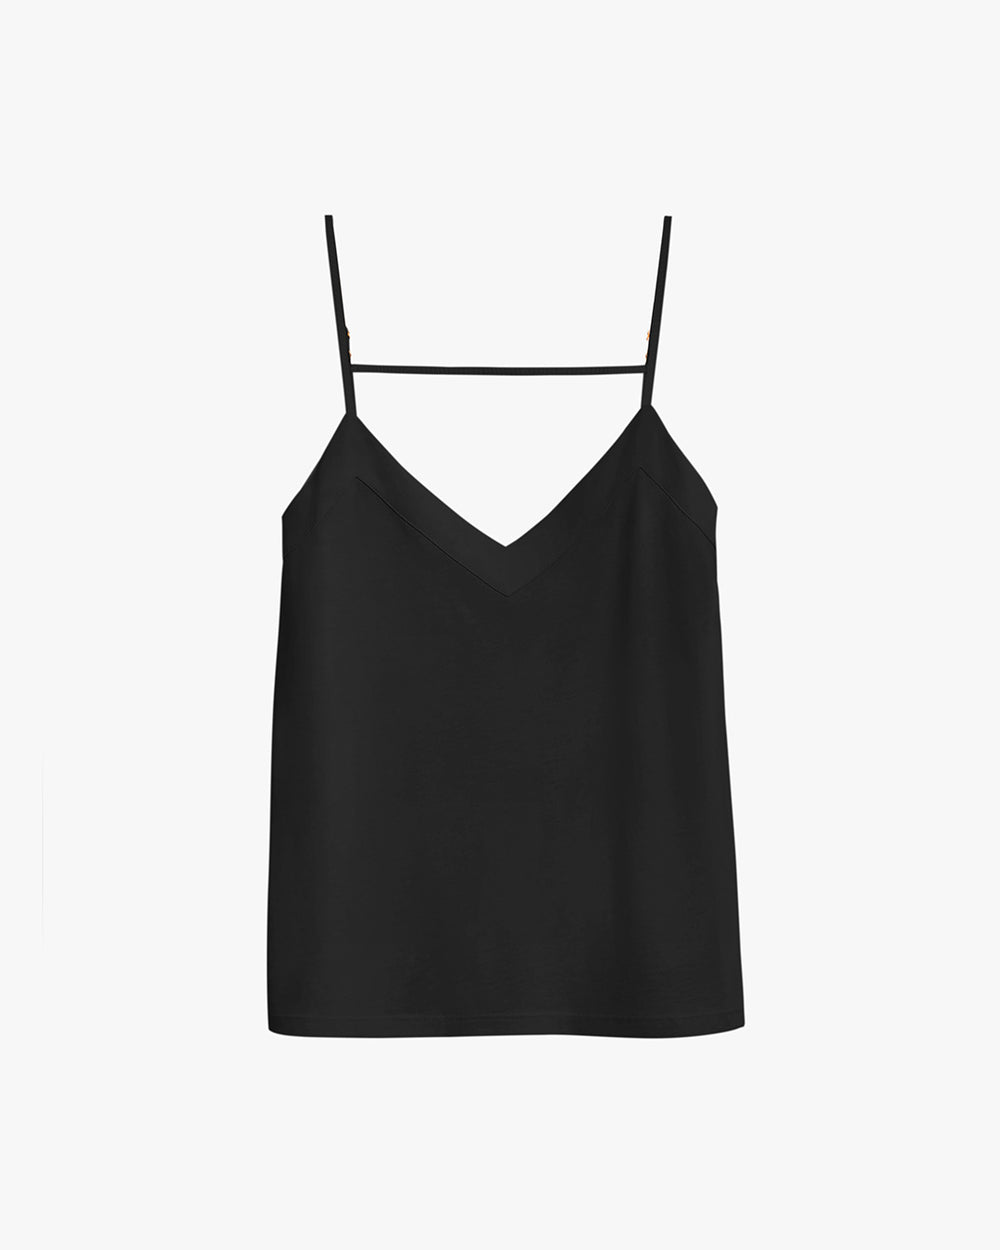 Sleeveless top with thin straps and a V-neckline